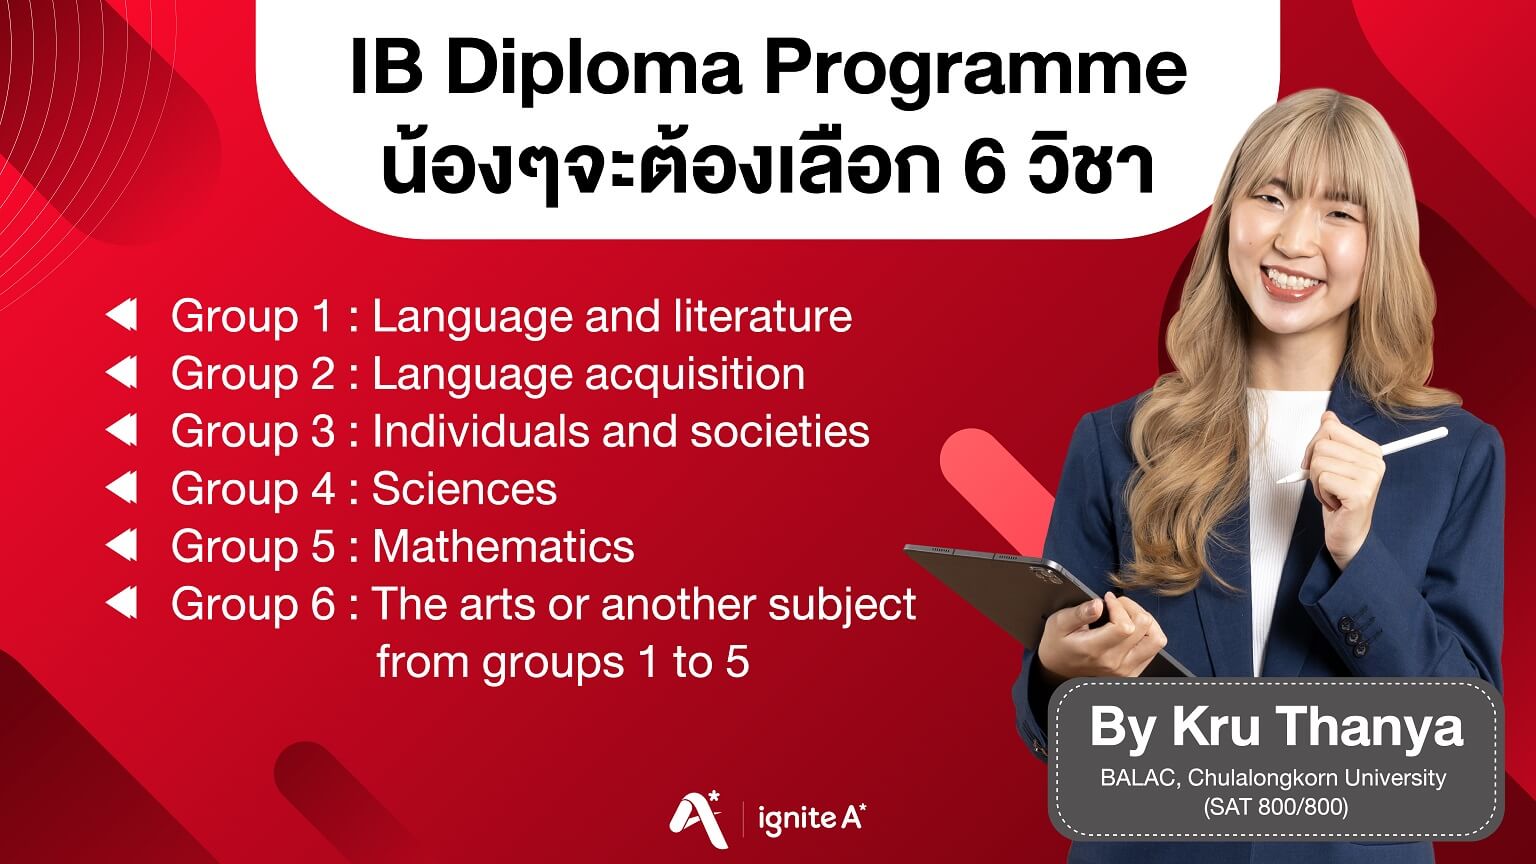 IB diploma programme 6 subjects by Ignite A*